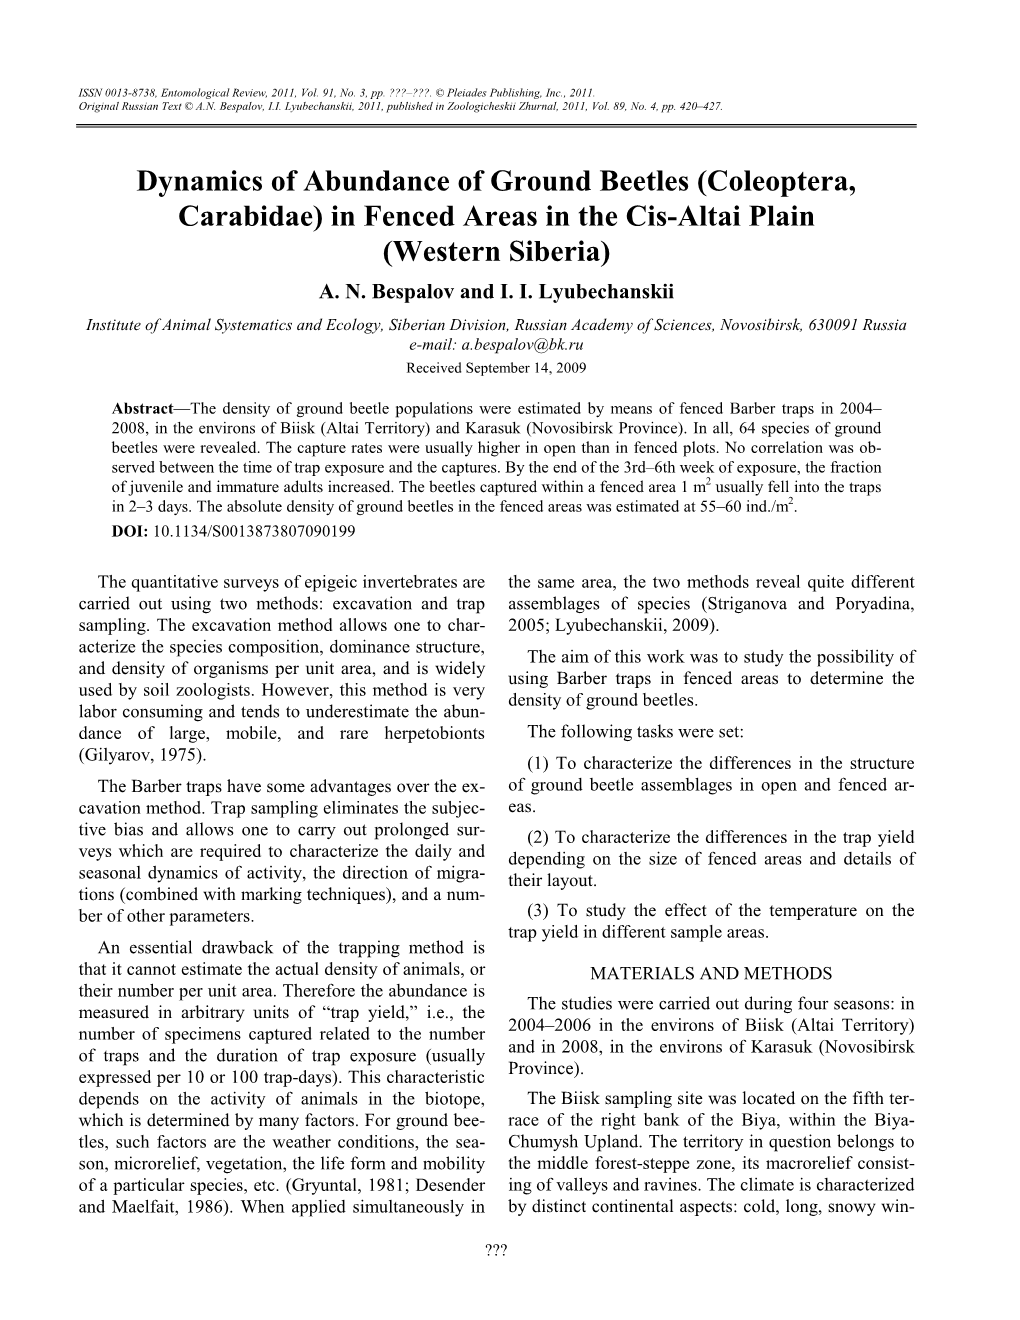 Dynamics of Abundance of Ground Beetles (Coleoptera, Carabidae) in Fenced Areas in the Cis-Altai Plain (Western Siberia) A